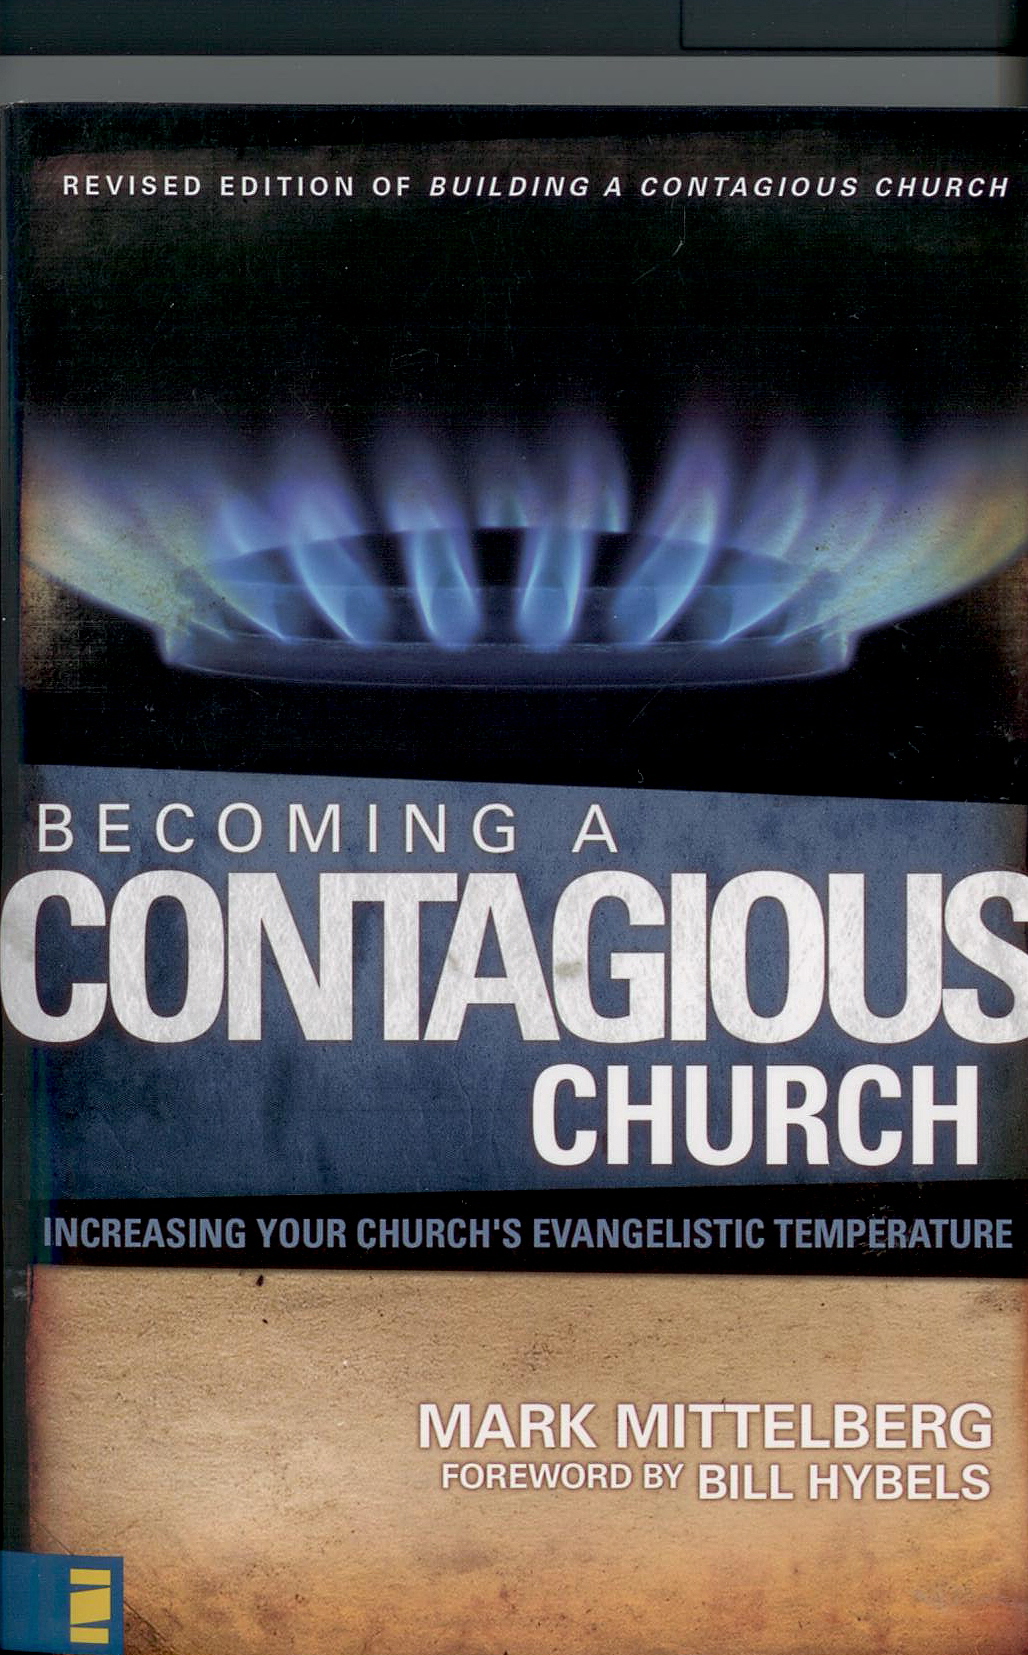 Becoming A Contagious Church by Mark Mittelberg